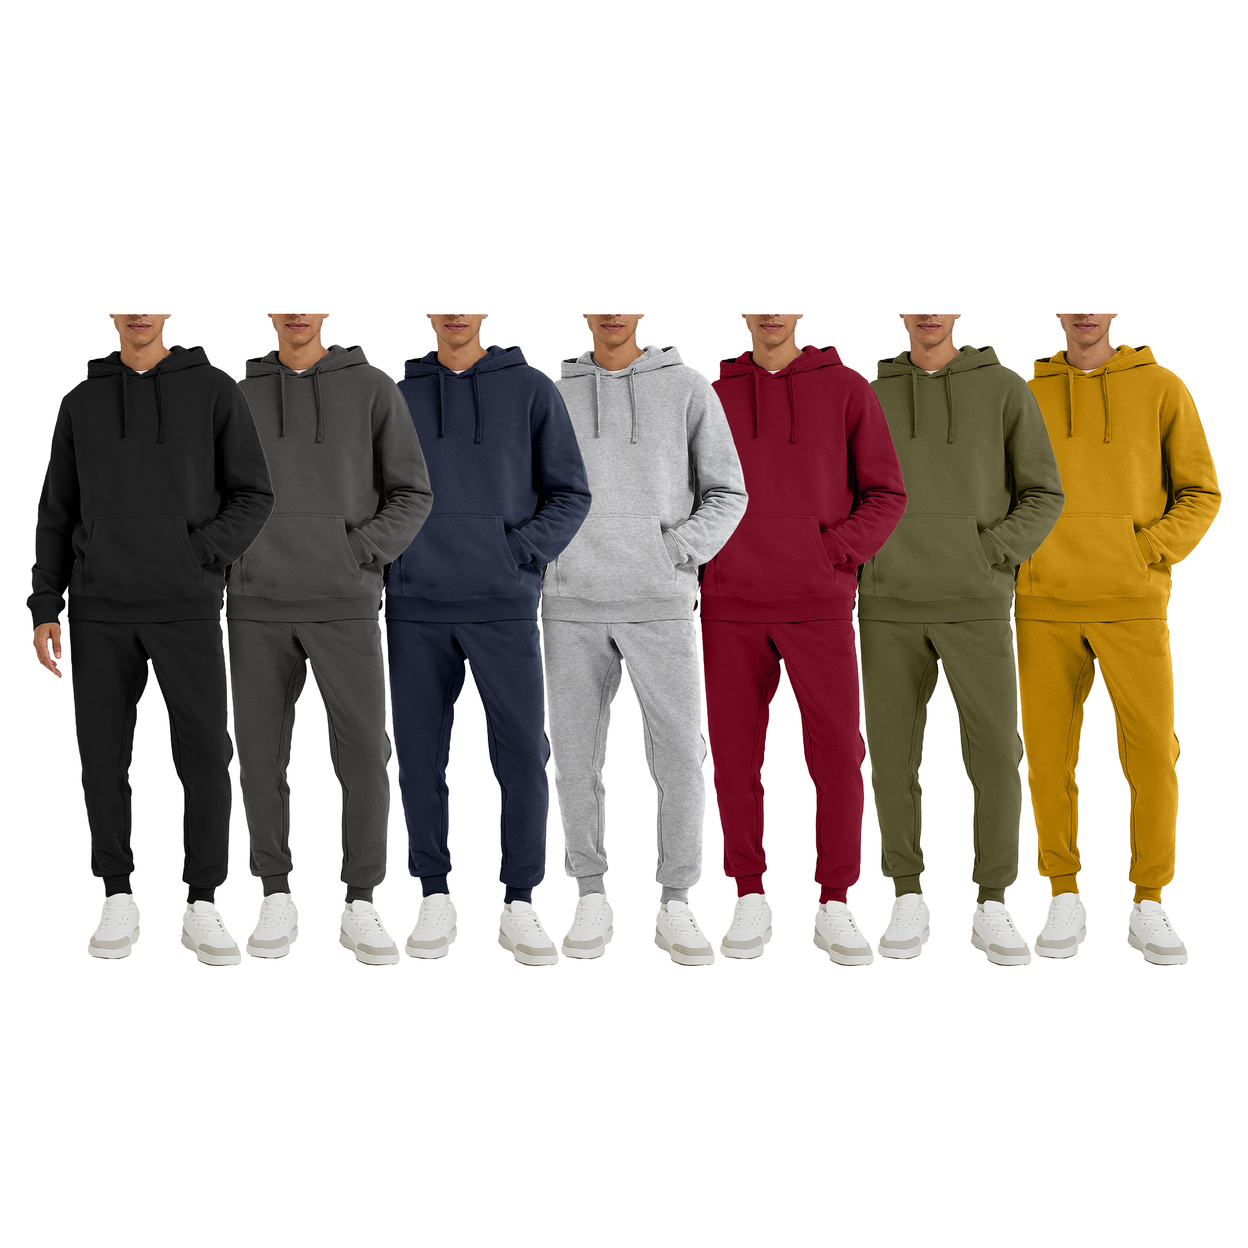 Multi-Pack: Men's Big & Tall Athletic Active Jogging Winter Warm Fleece Lined Pullover Tracksuit Set - Charcoal, 1-pack, X-large